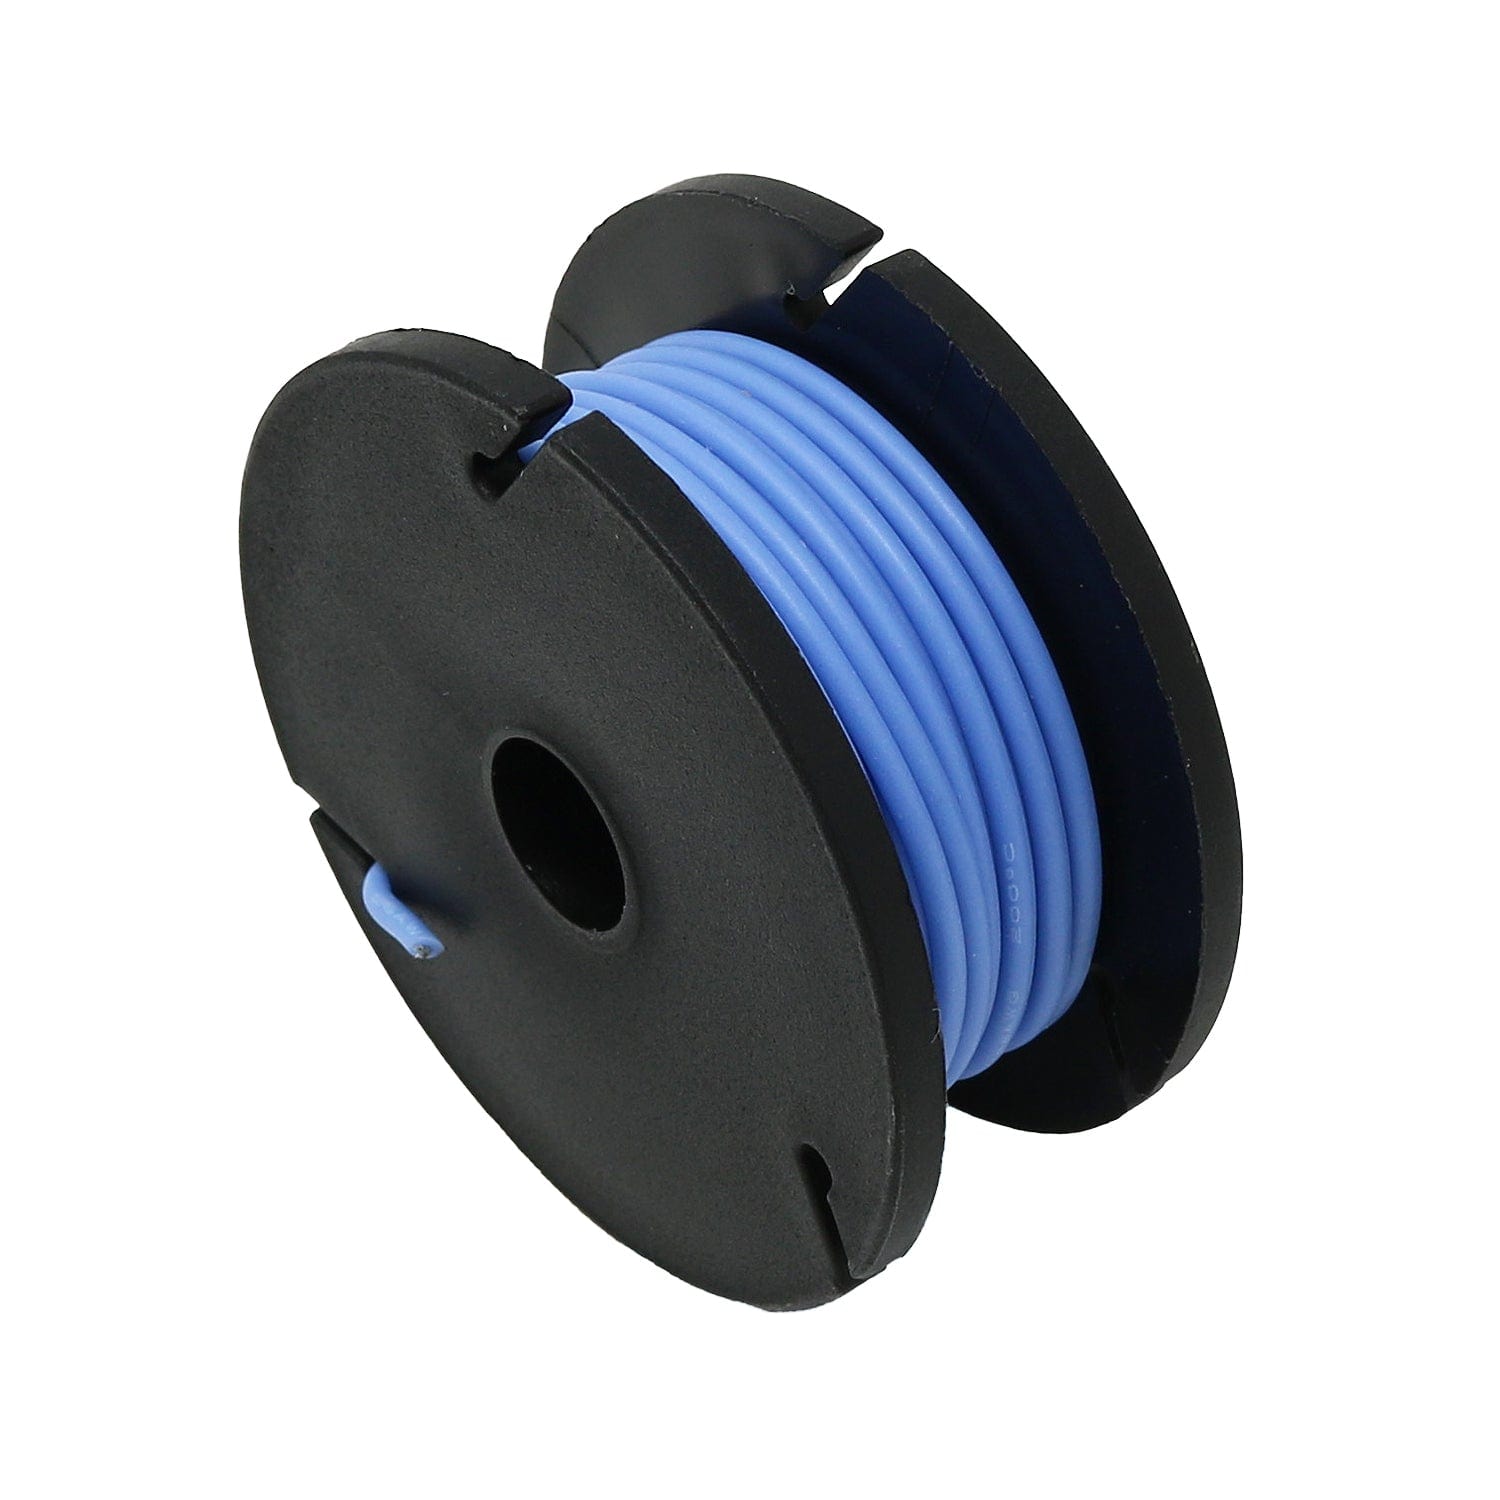 Silicone Cover Stranded-Core Wire - 25ft 26AWG - Blue - The Pi Hut